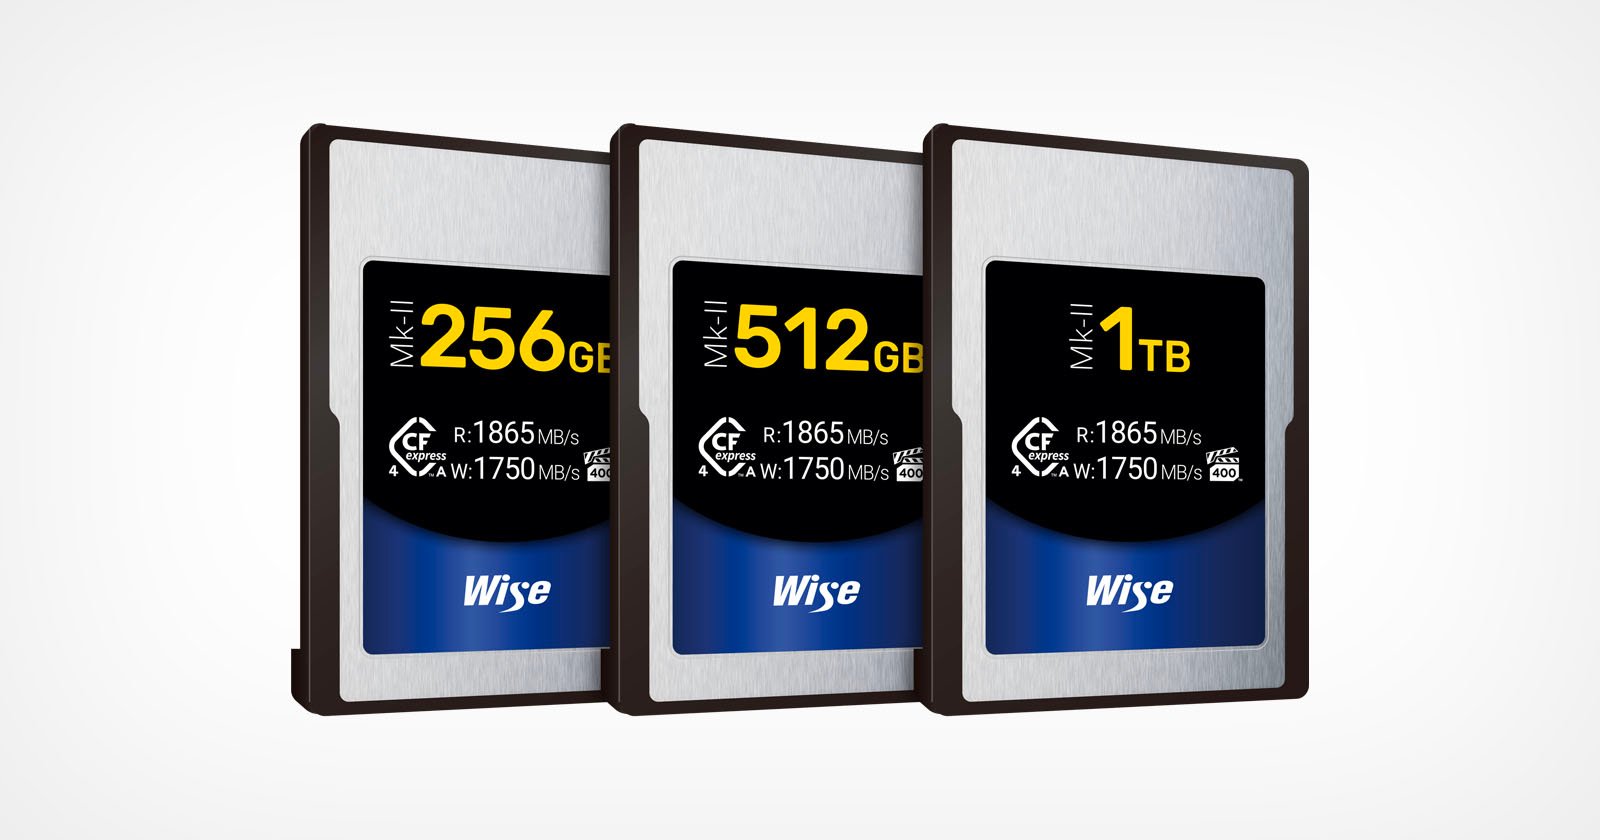 Wise’s Sony Memory Cards Are Now Certified to Perform to Their Promises